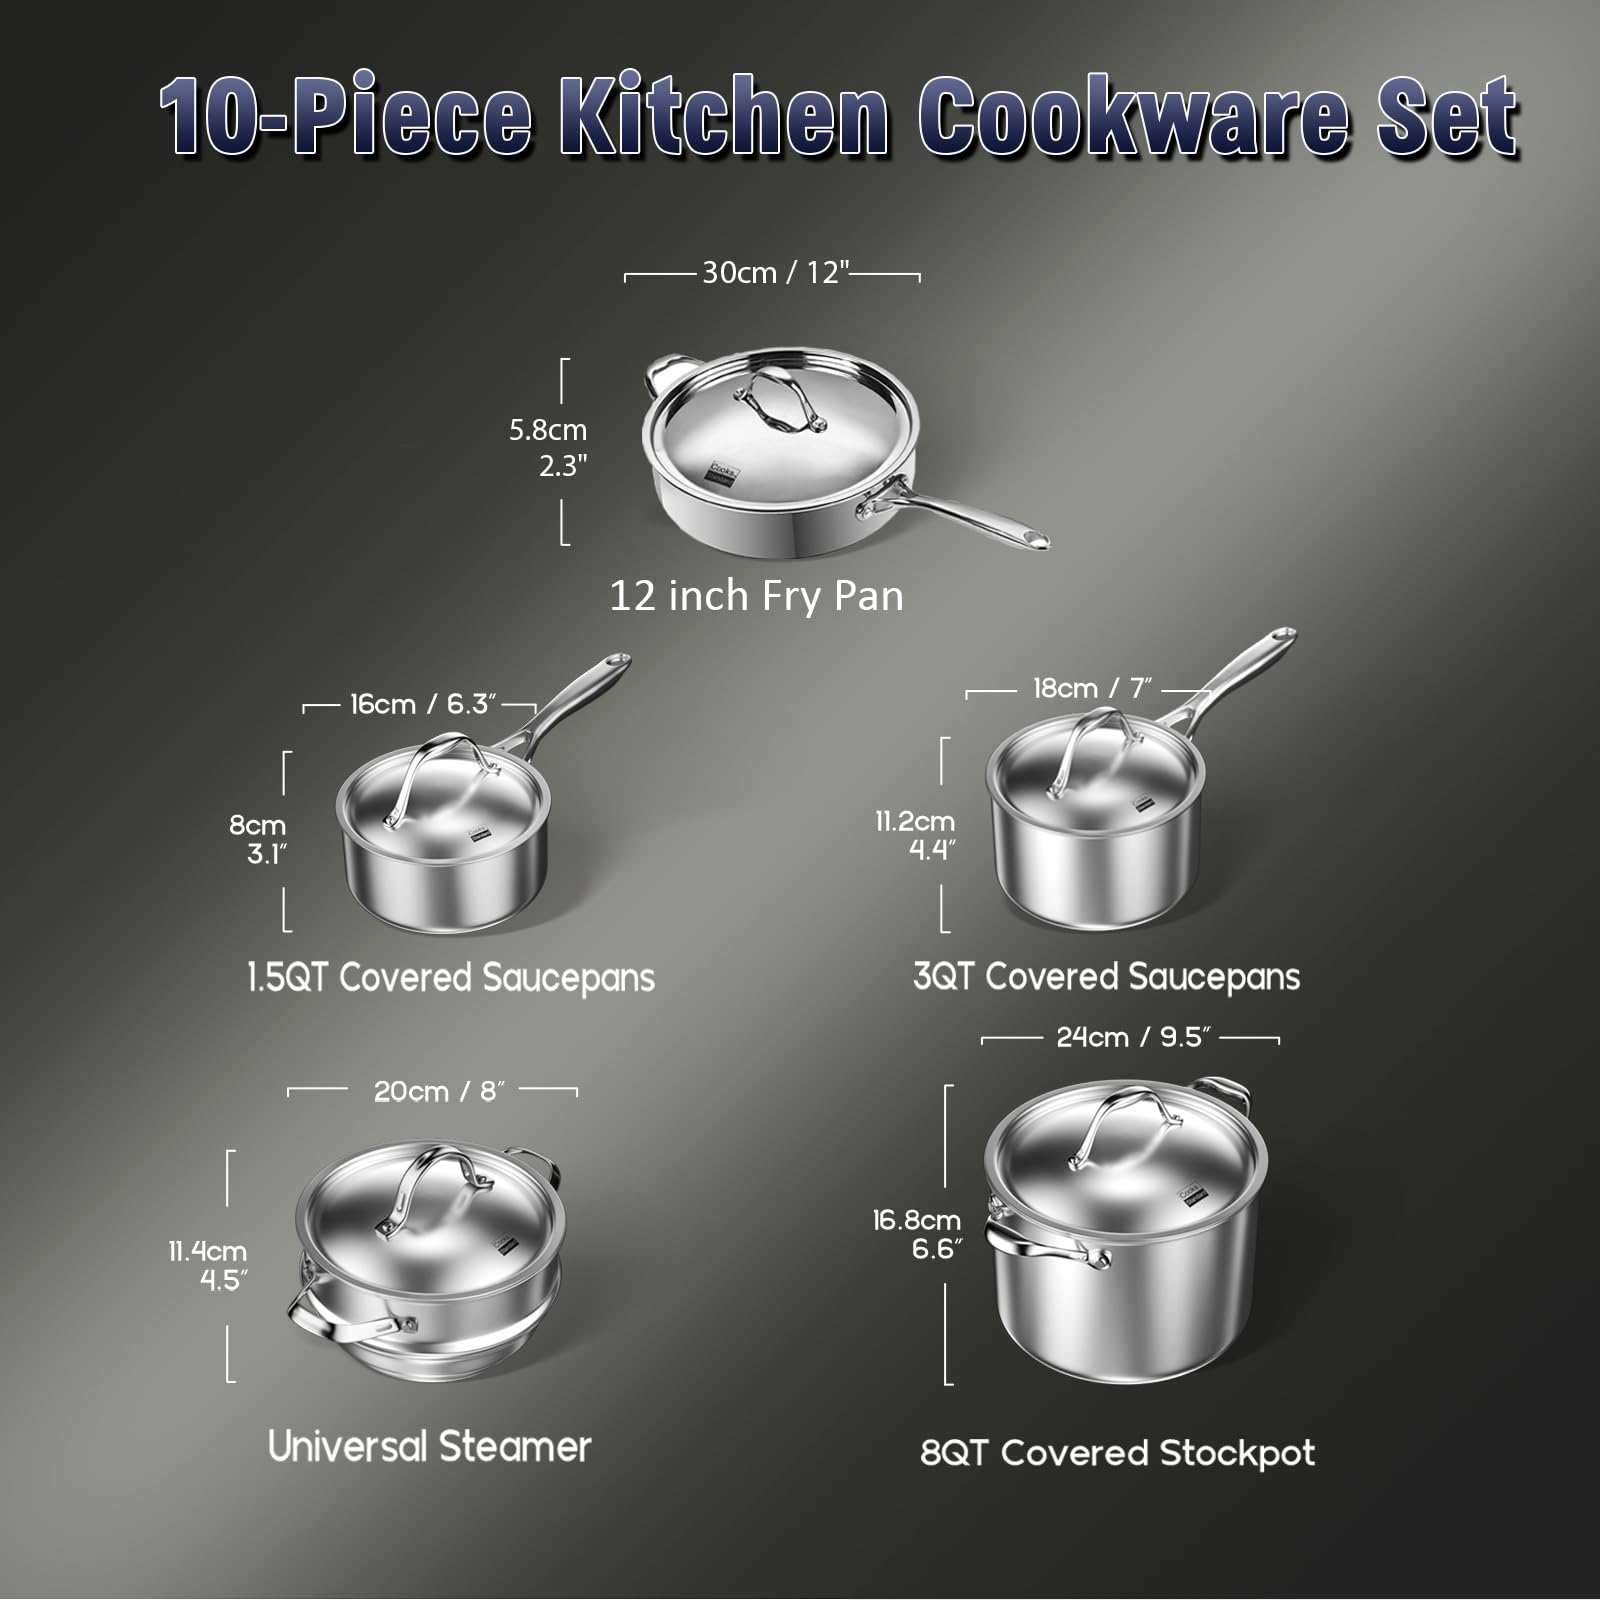 Cooks Standard Stainless Steel Induction Cookware Sets, 10 Piece Multi-Ply Clad Pots and Pans Set with Stay-Cool Handles, Kitchen Cooking Pans, Dishwasher Safe